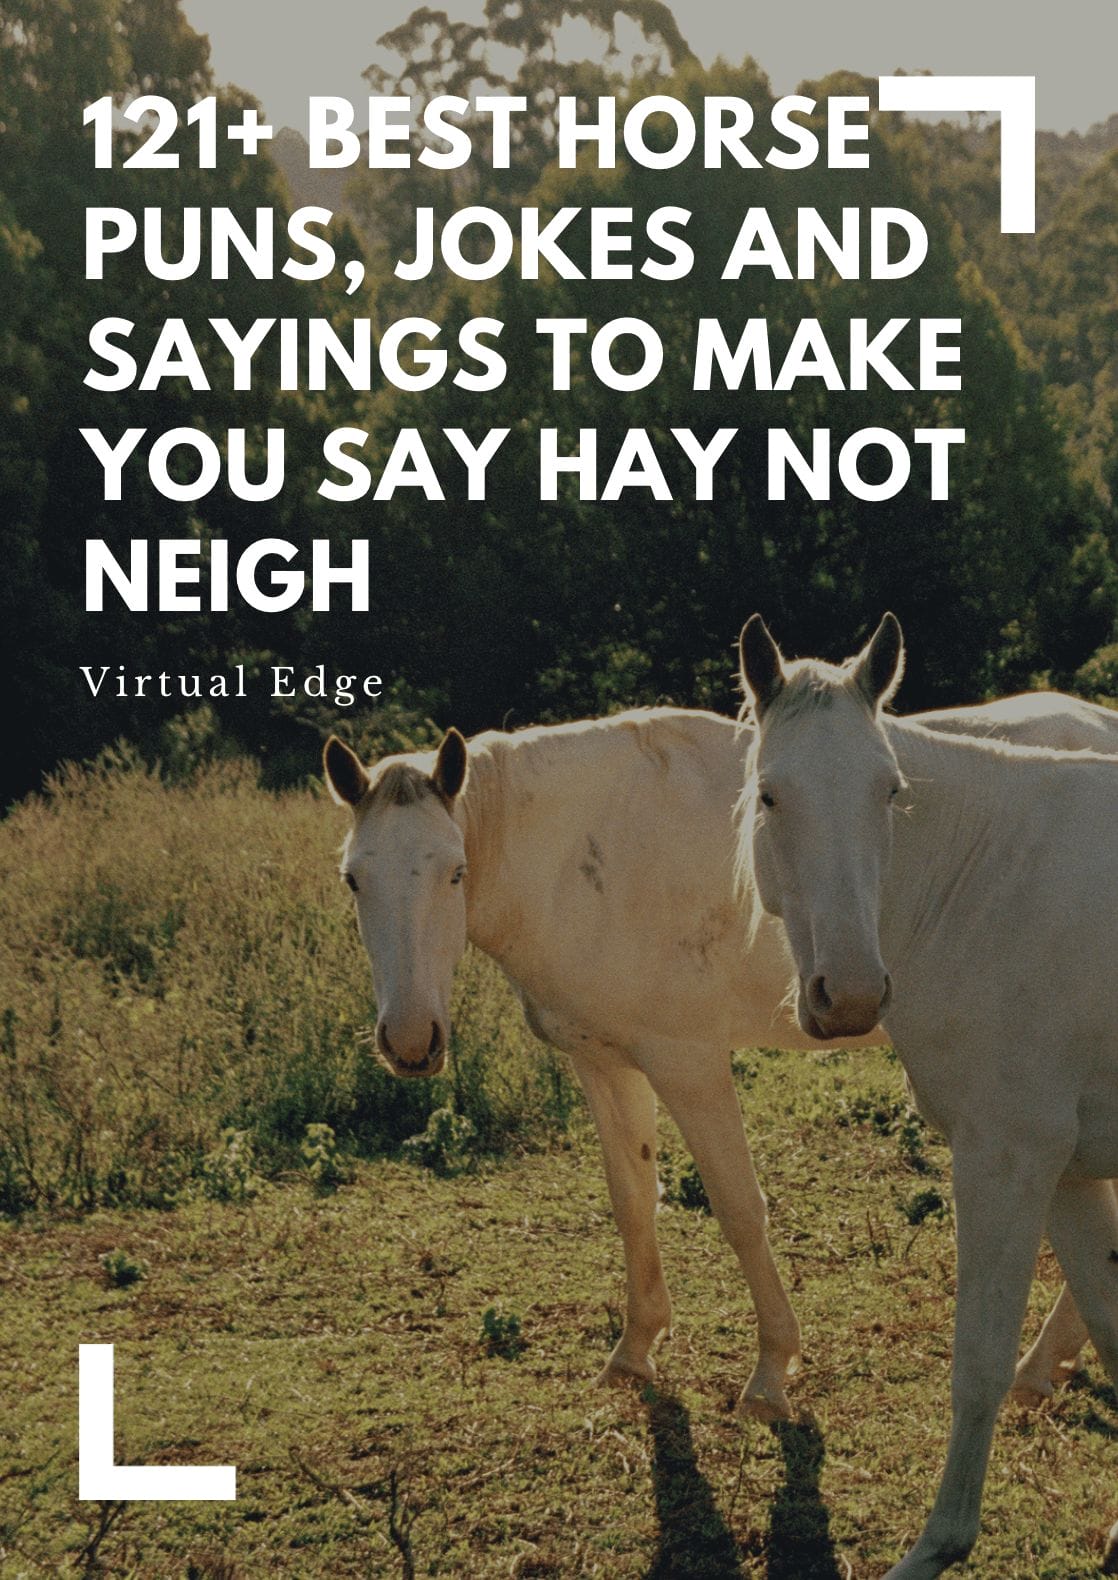 121+ Best Horse Puns, Jokes and Sayings to Make You Say Hay Not Neigh